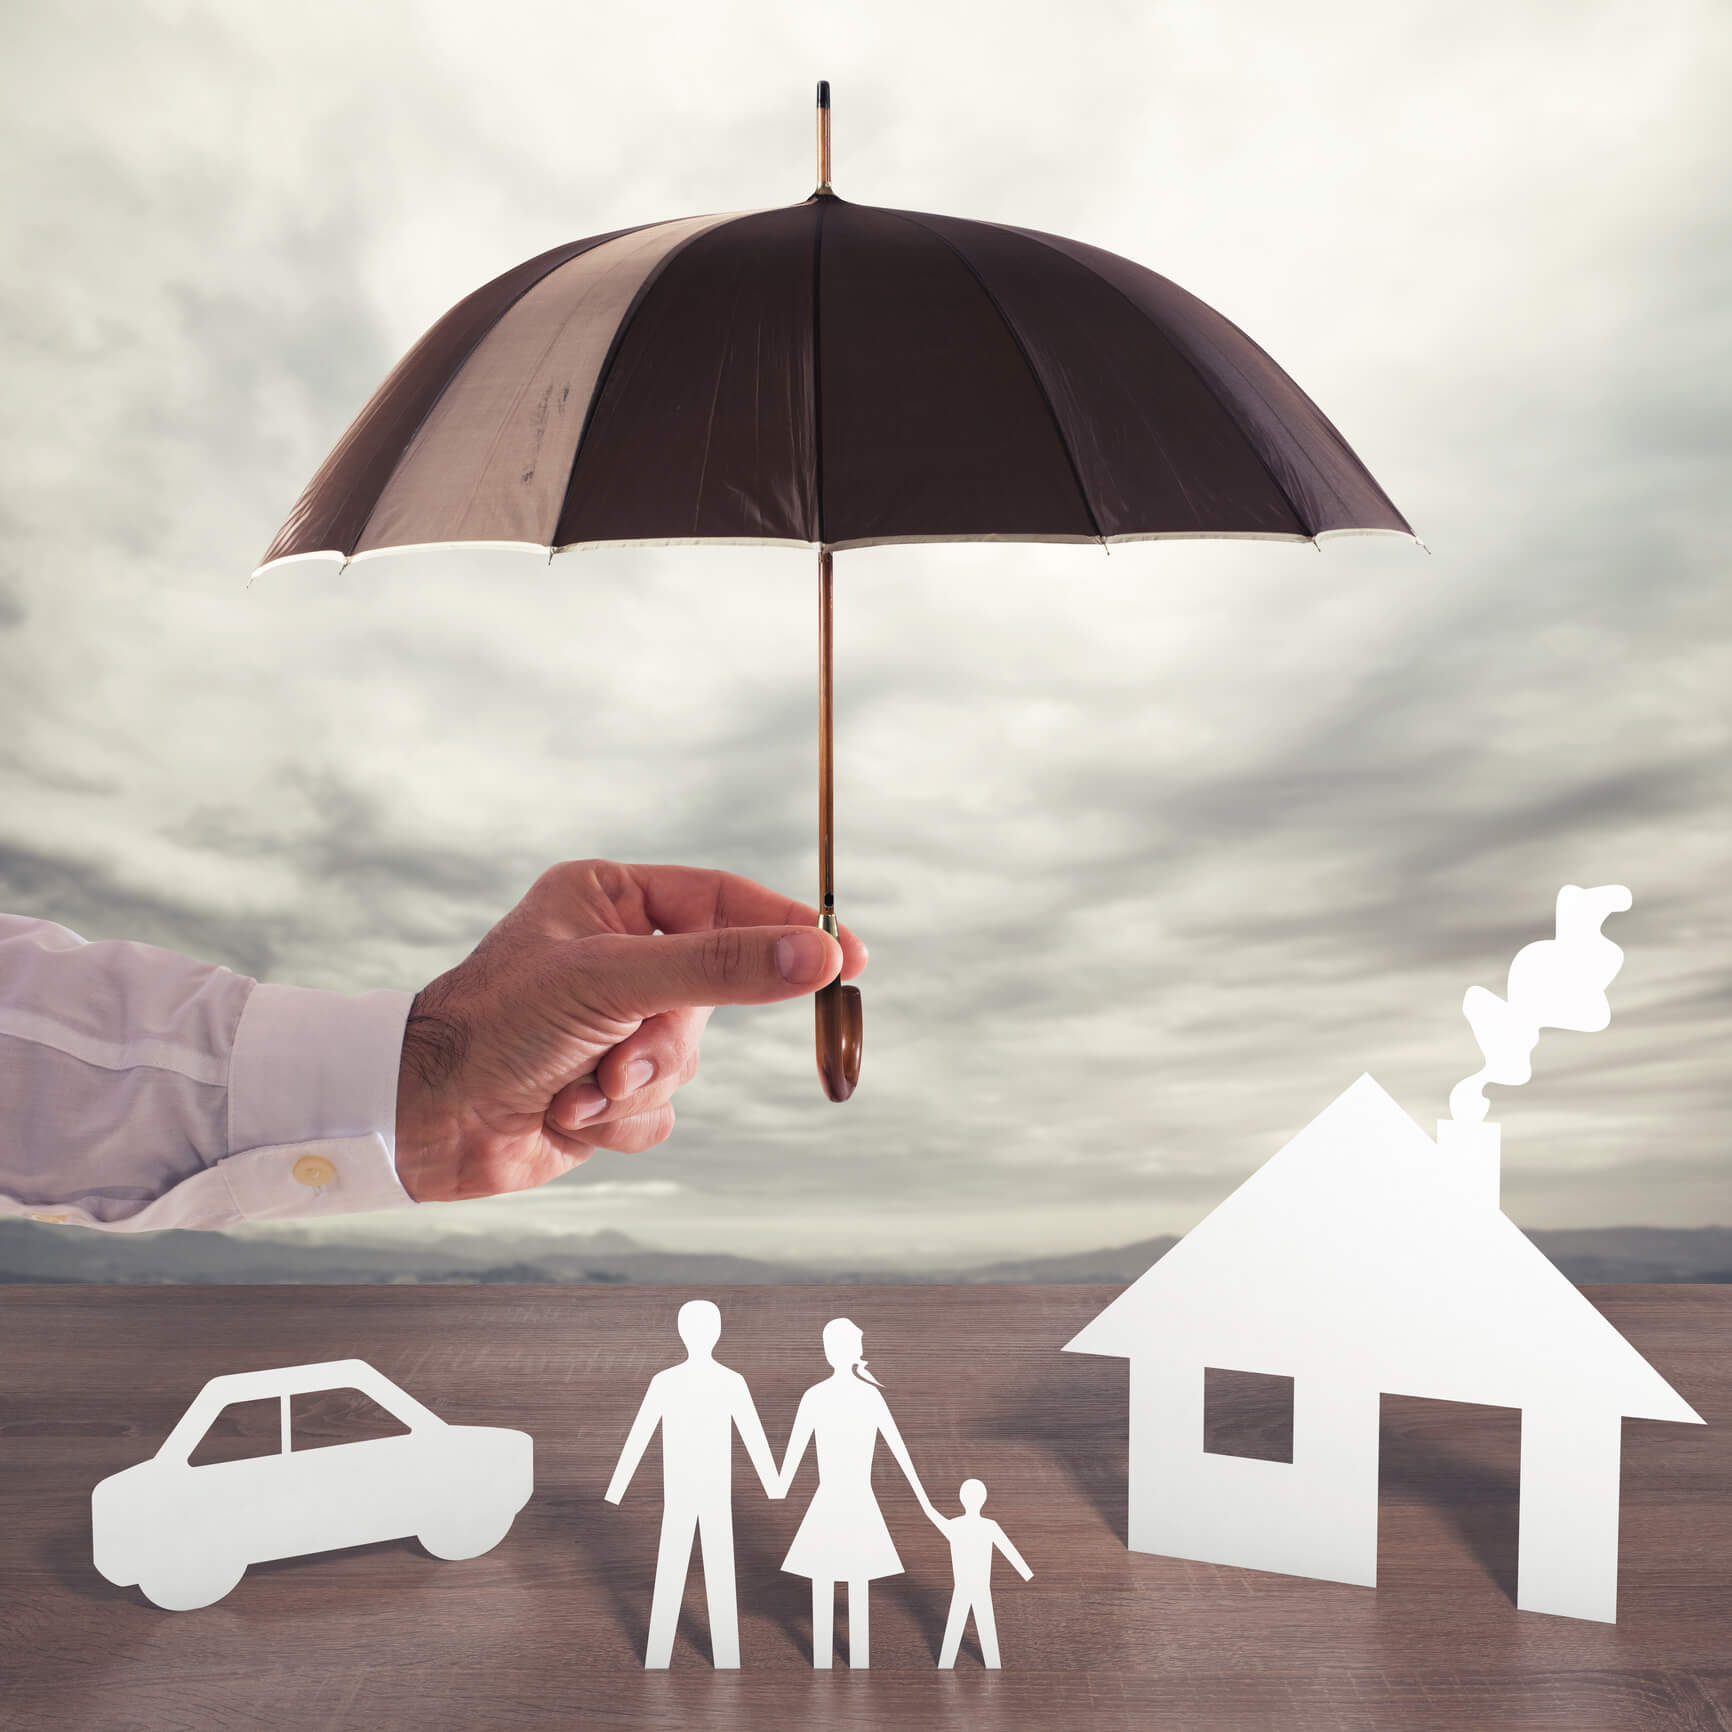 Disadvantages of Life Insurance - Complete Controller